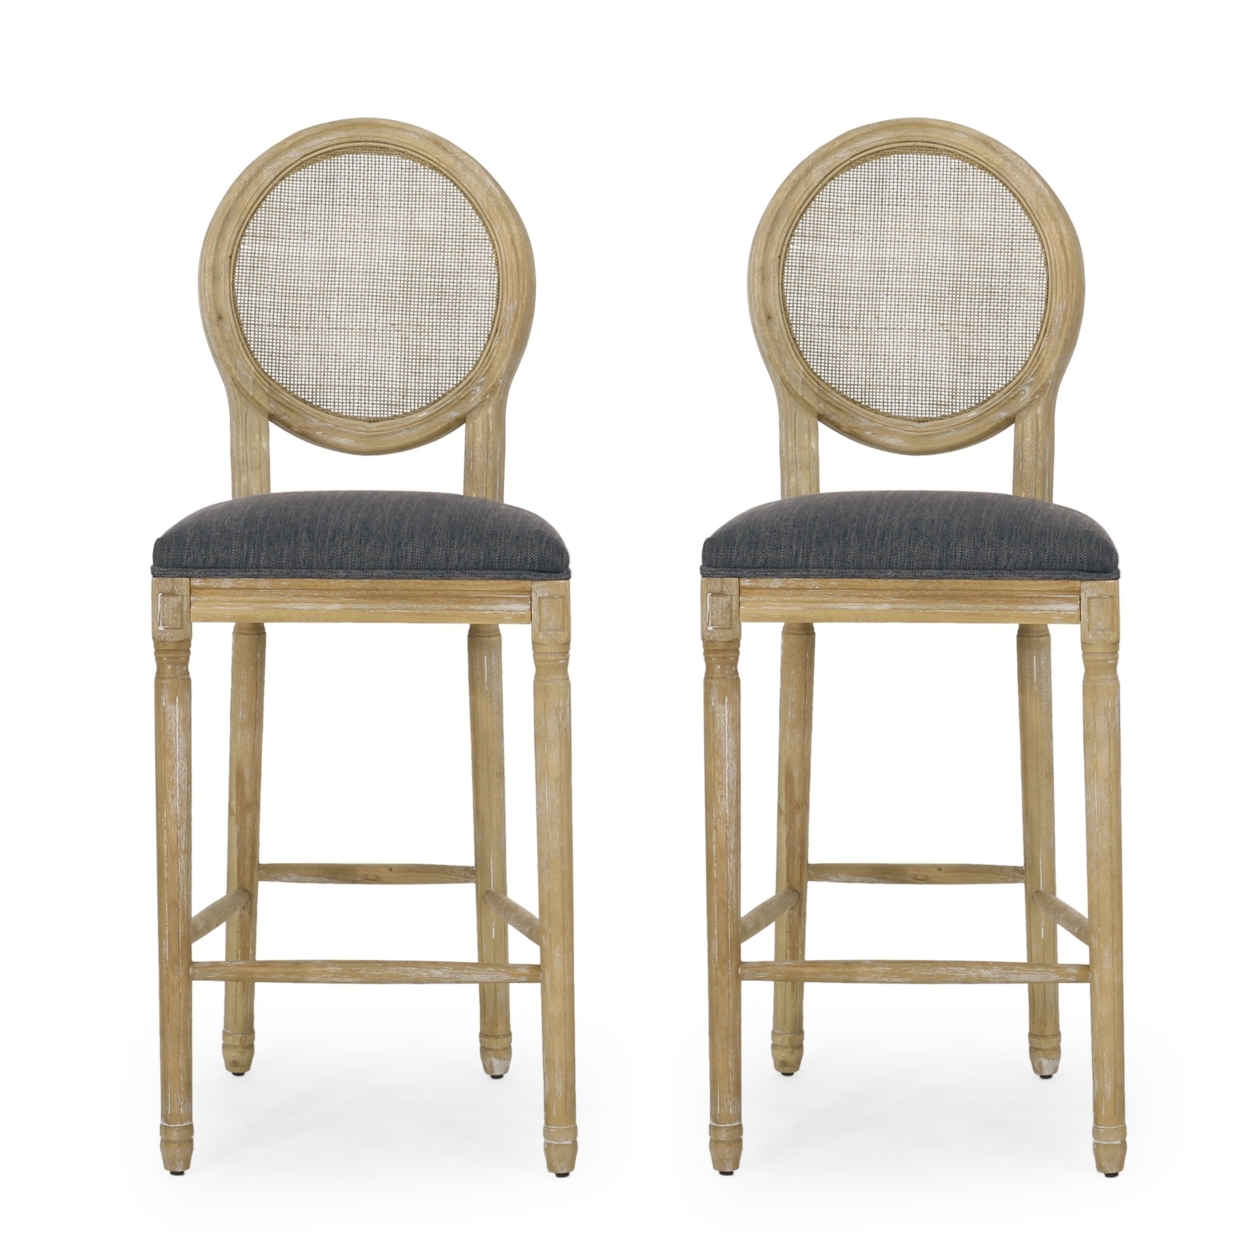 Salton French Country Wooden Barstools With Upholstered Seating (Set Of 2) - Natural/charcoal